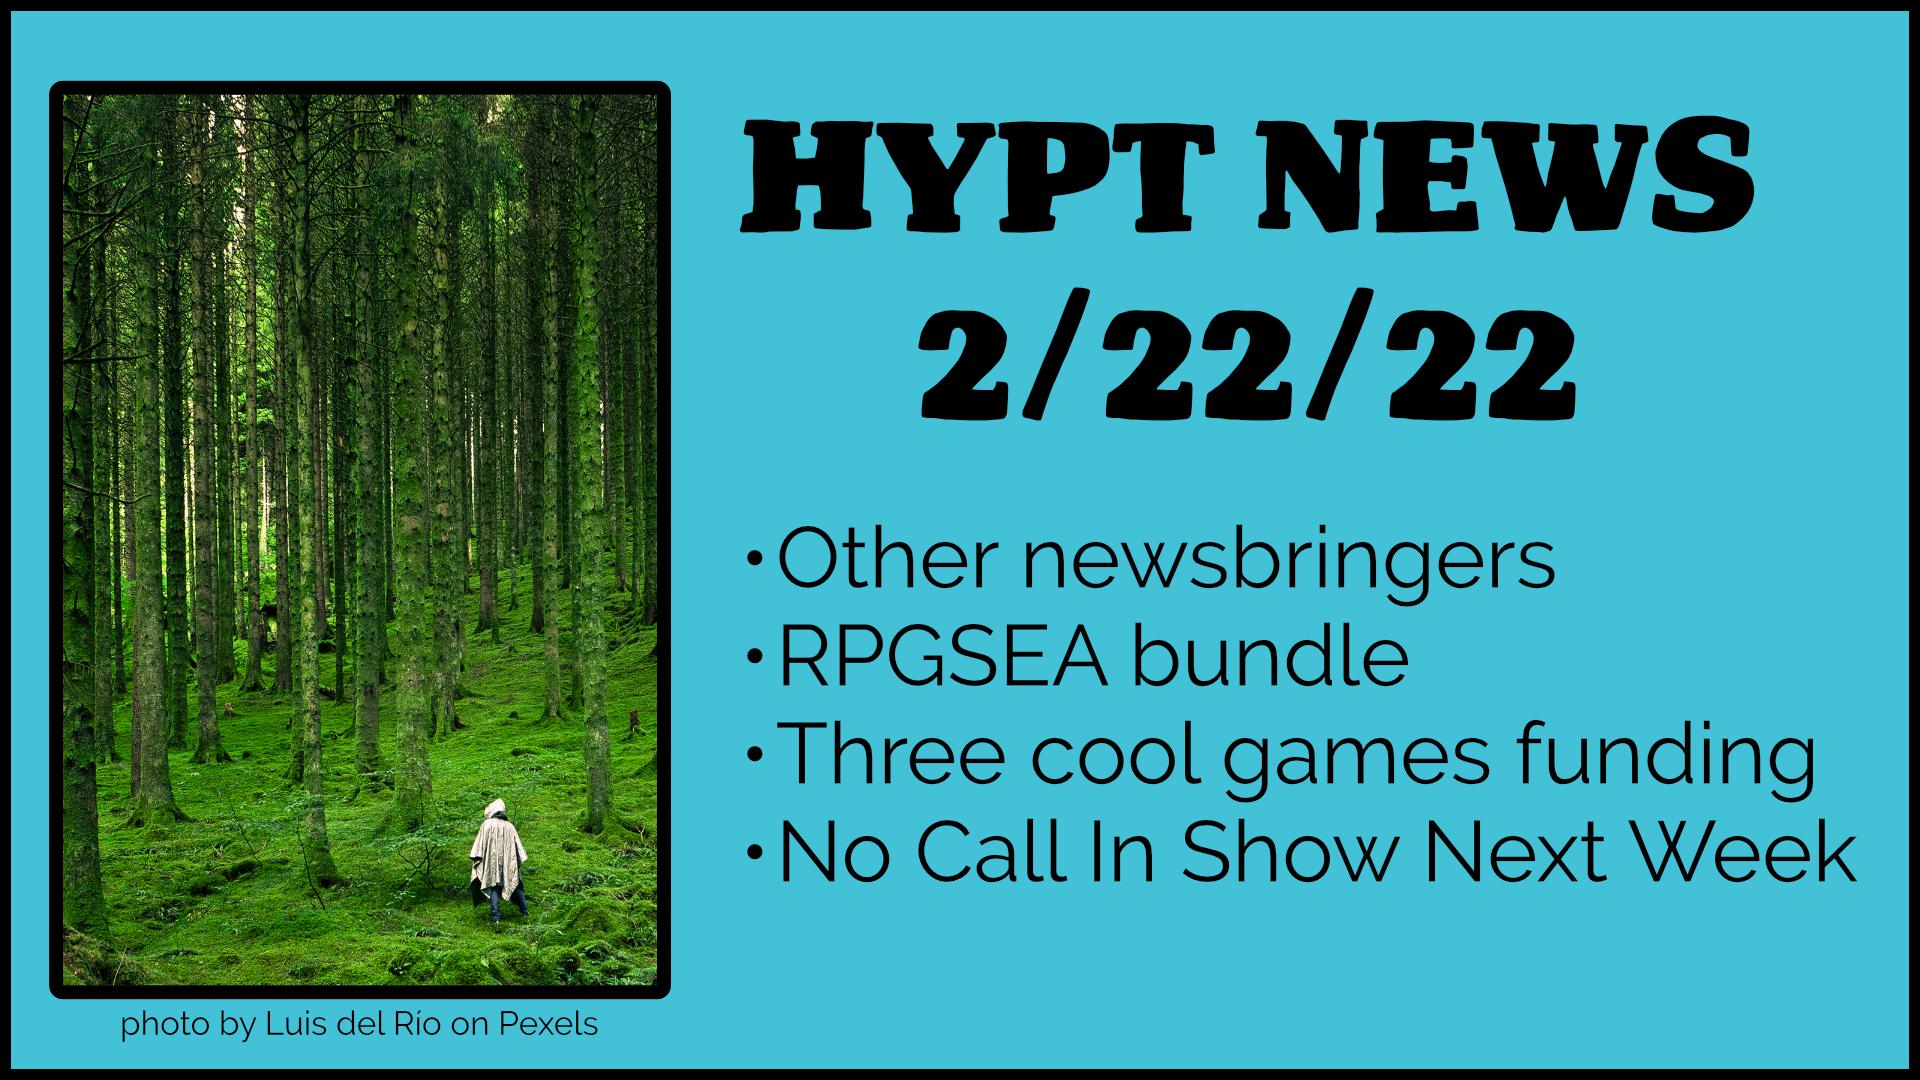 Cover Image for The HYPT Weekly News 2/22/22